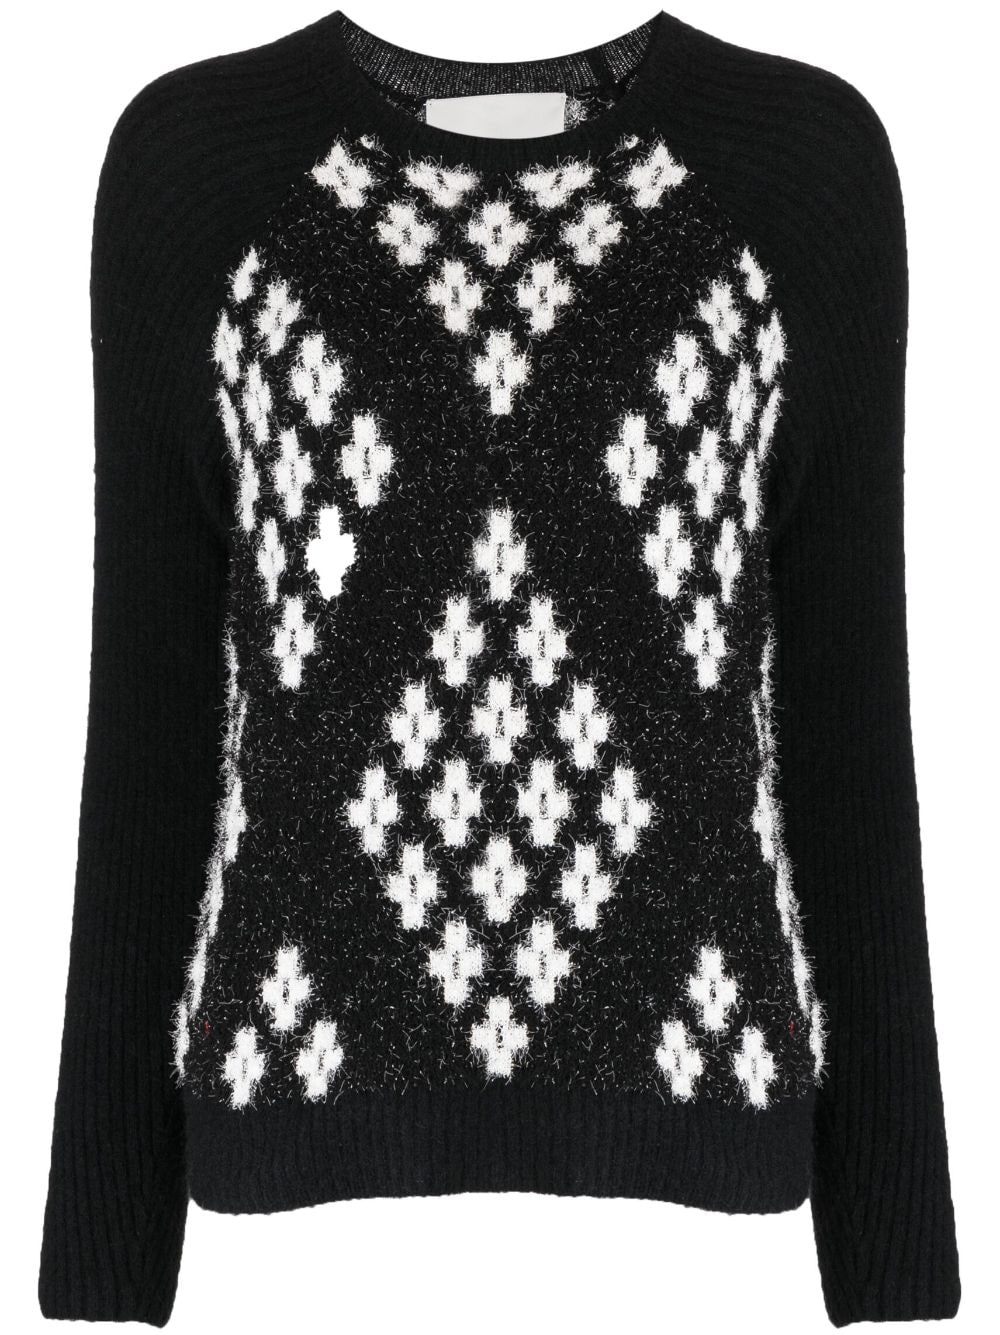 Image 1 of 3.1 Phillip Lim argyle-check knitted jumper